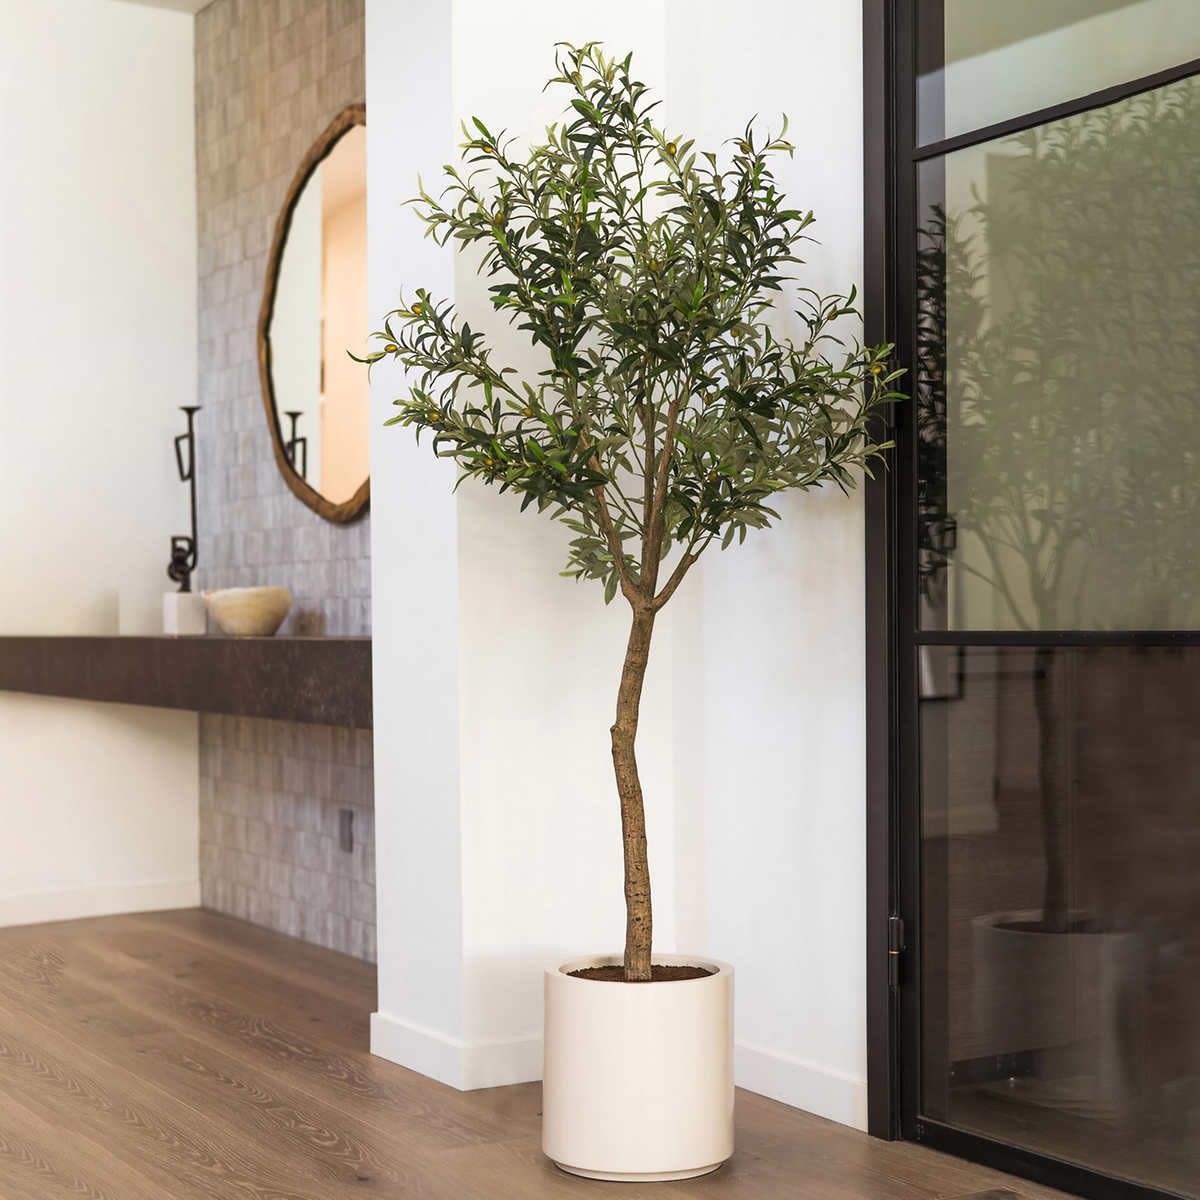 Faux Olive Tree from Costco